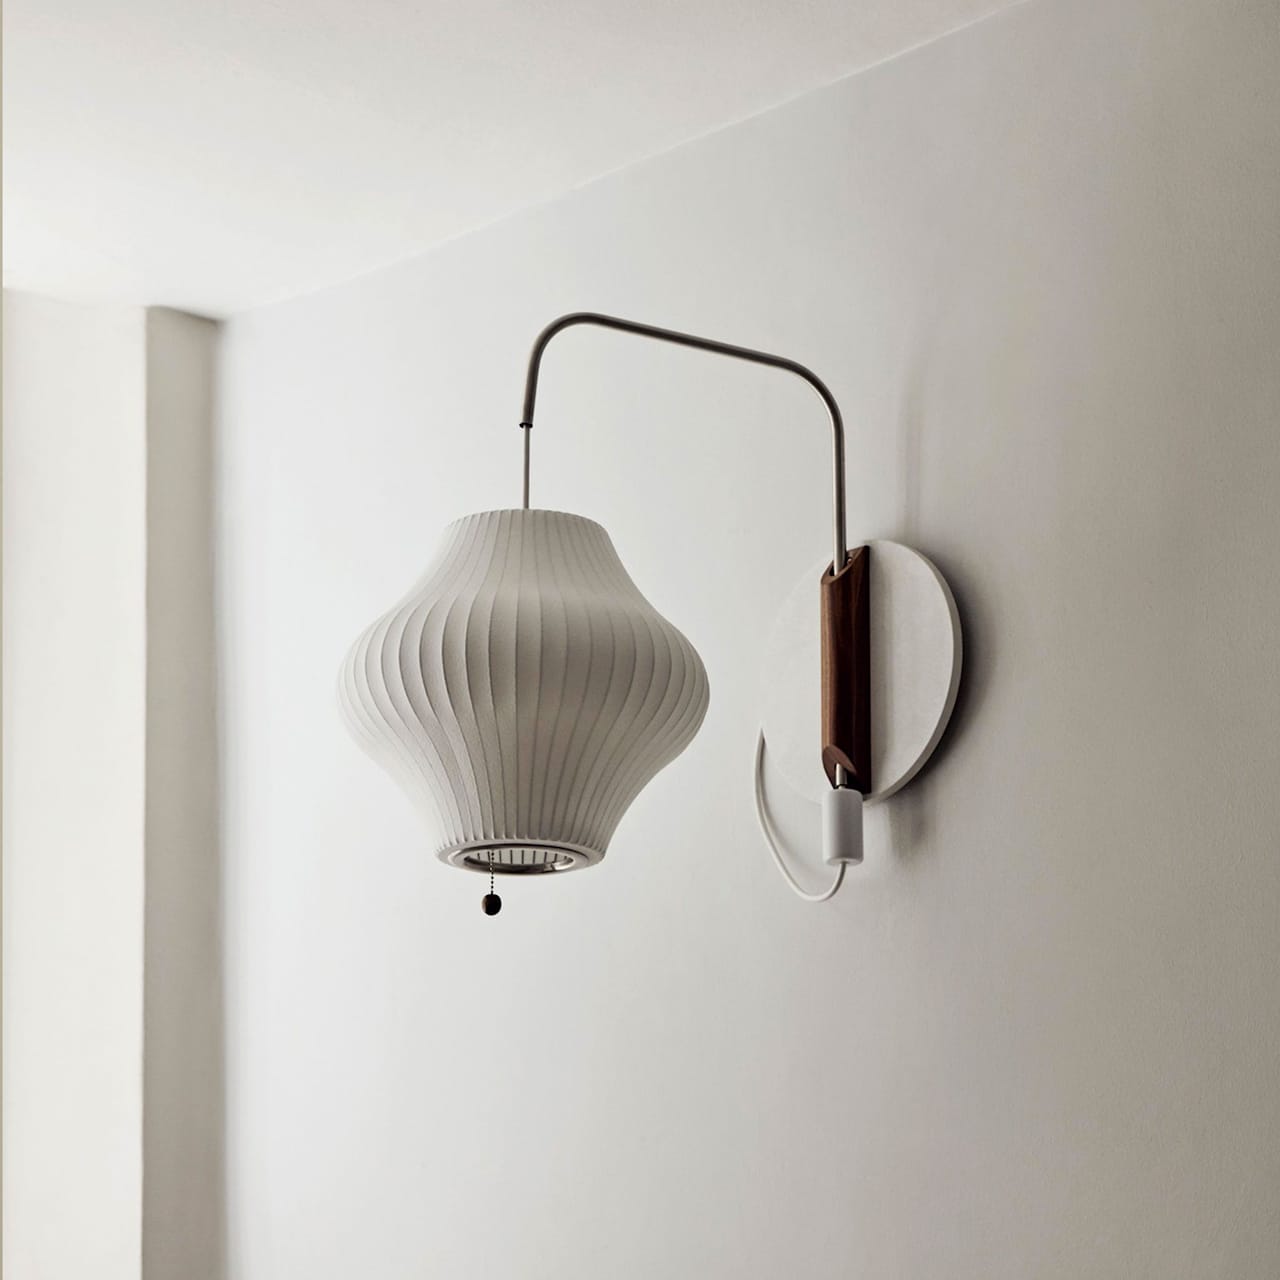 Nelson Pear Wall Sconce